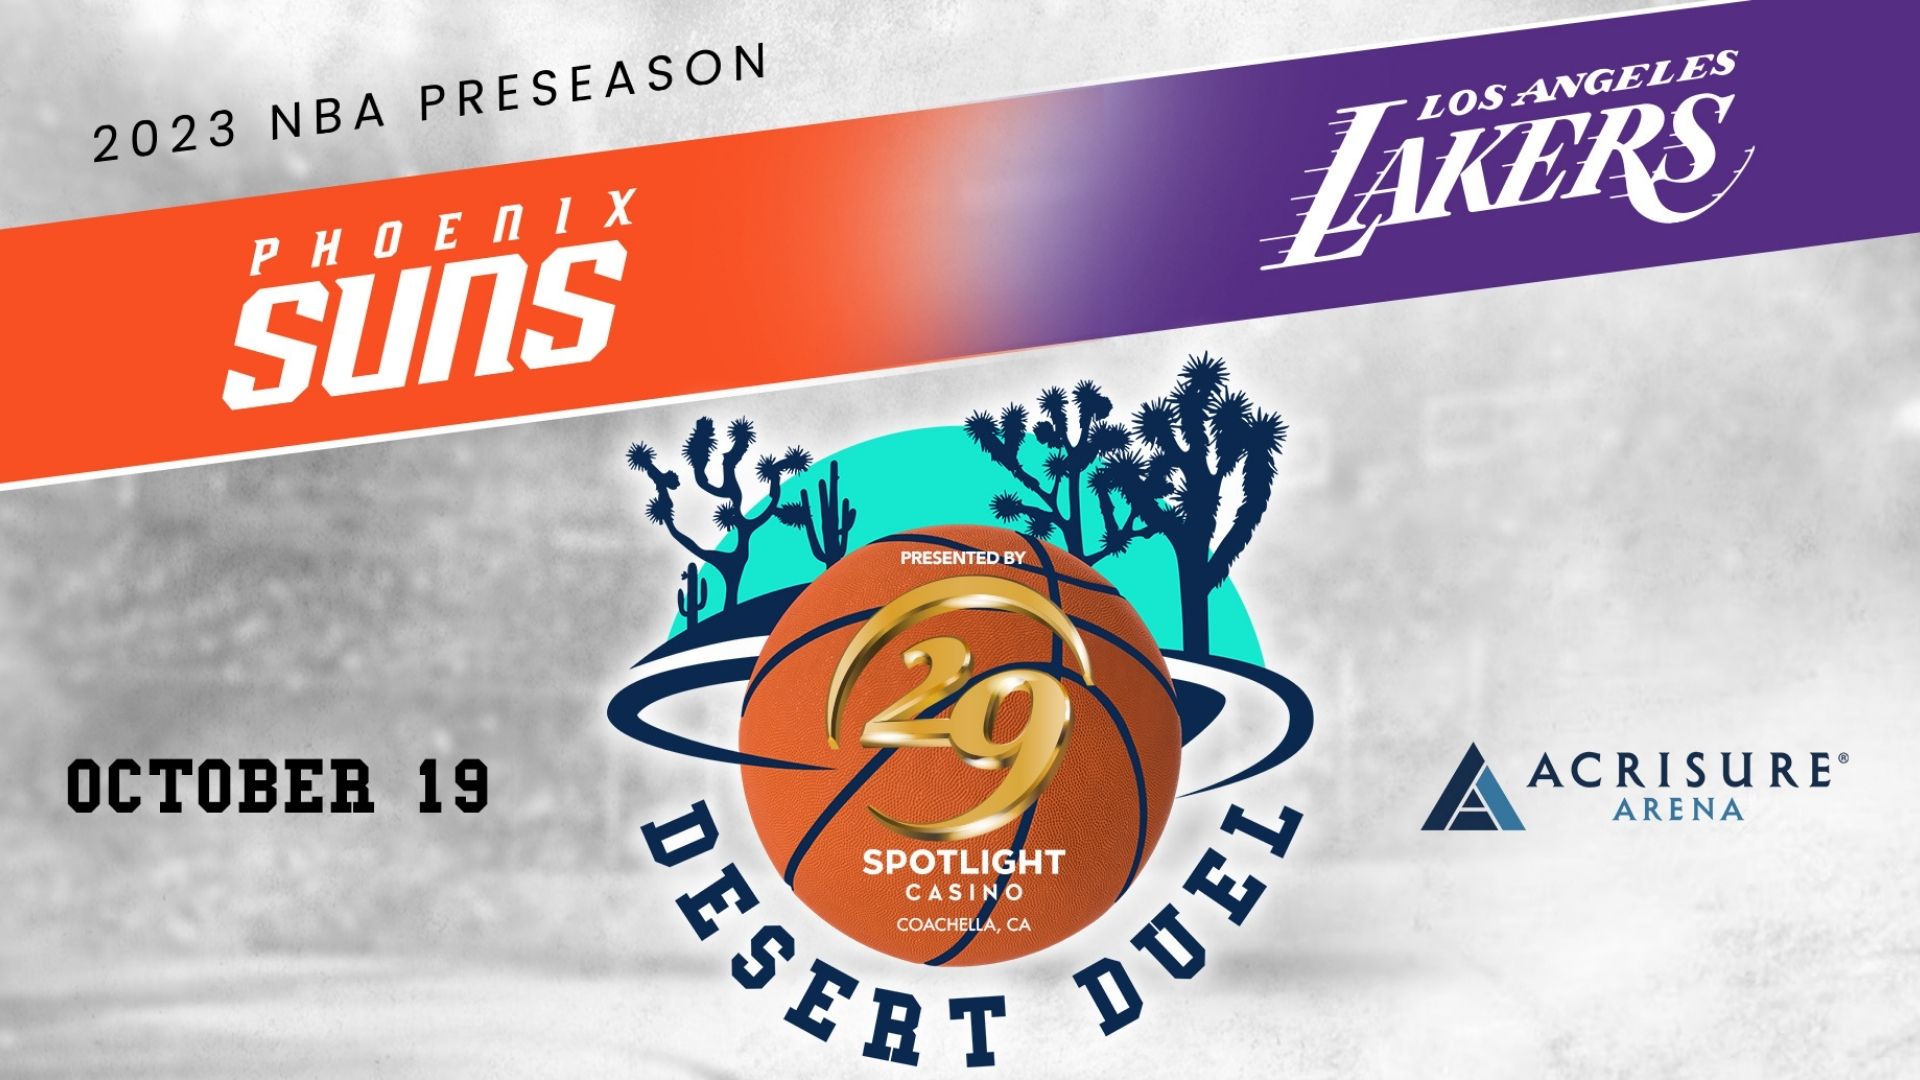 1st Annual Desert Duel presented by Spotlight 29 Casino features the Los Angeles Lakers and the Phoenix Suns